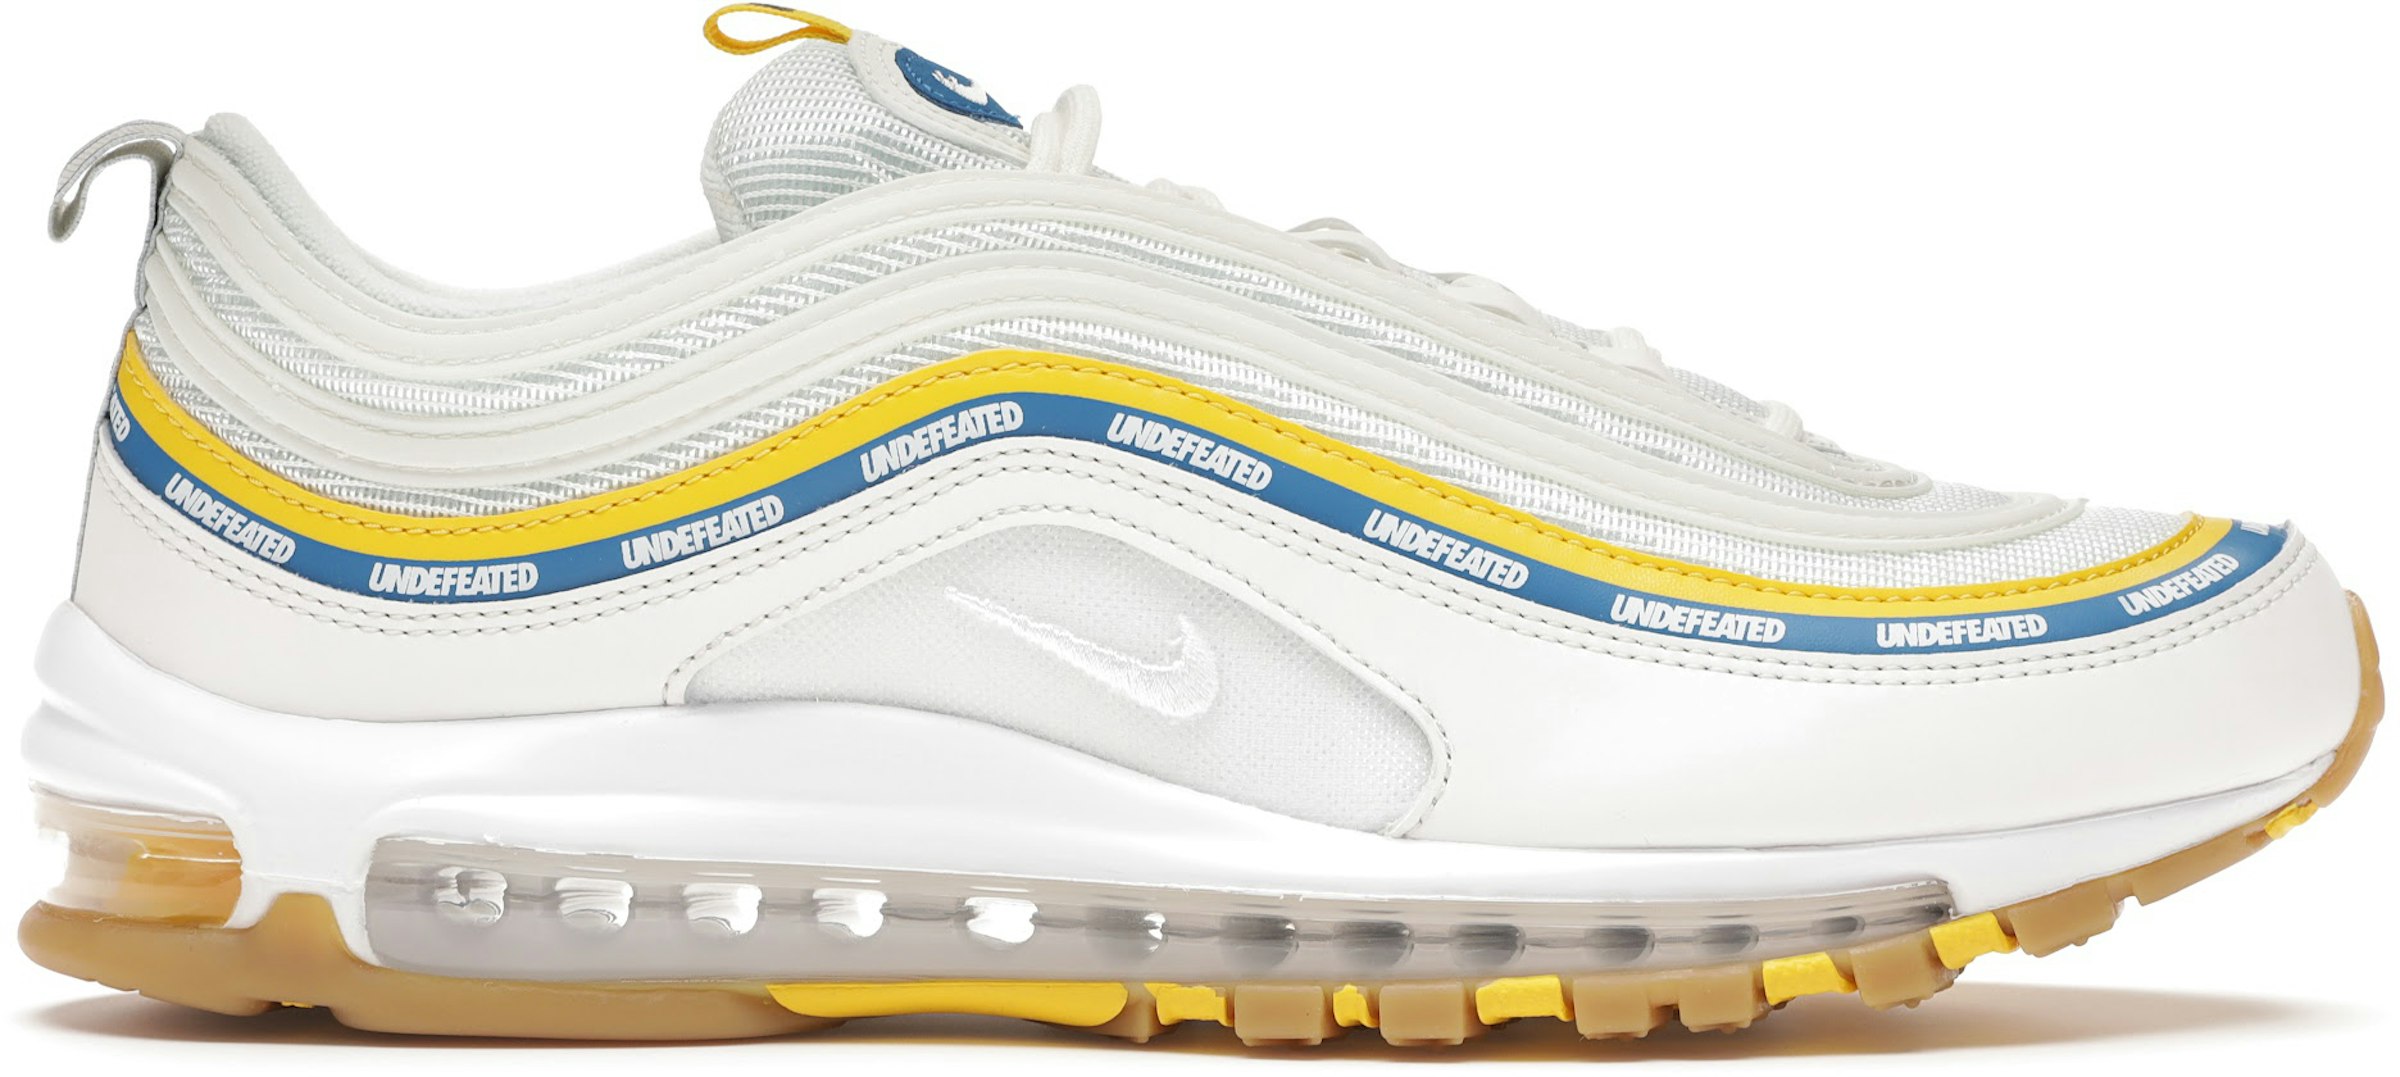 accelerator ejer knap Nike Air Max 97 Undefeated UCLA Men's - DC4830-100 - US